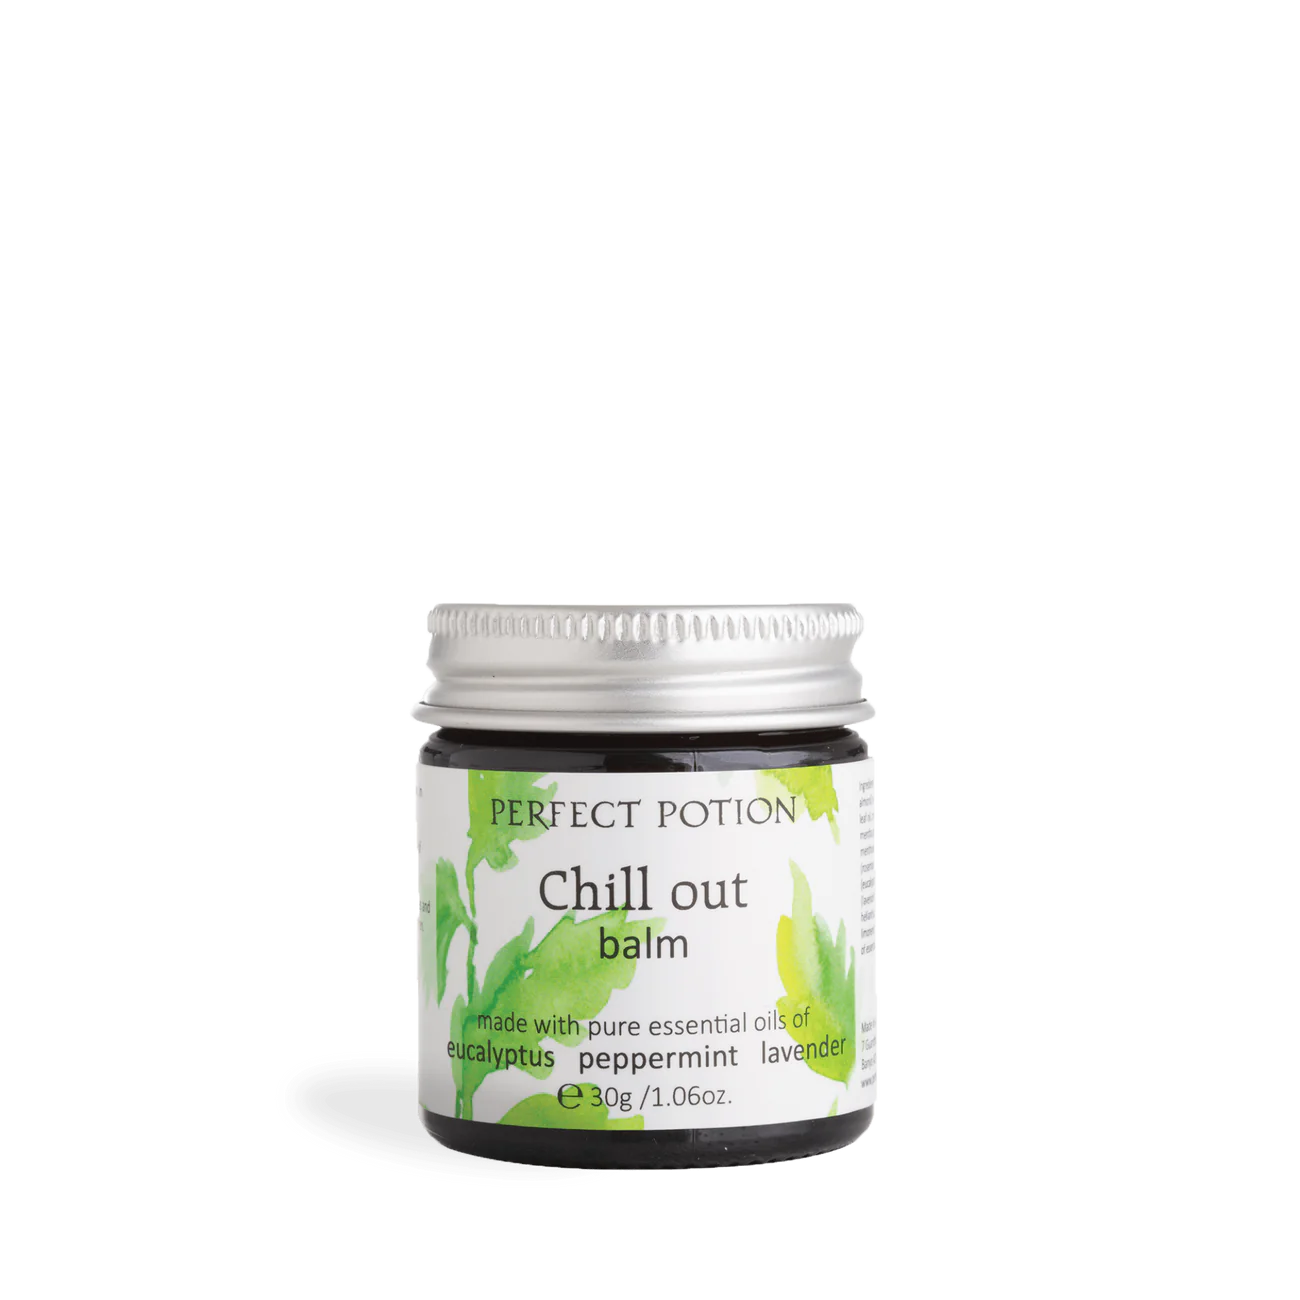 Chill Out Balm